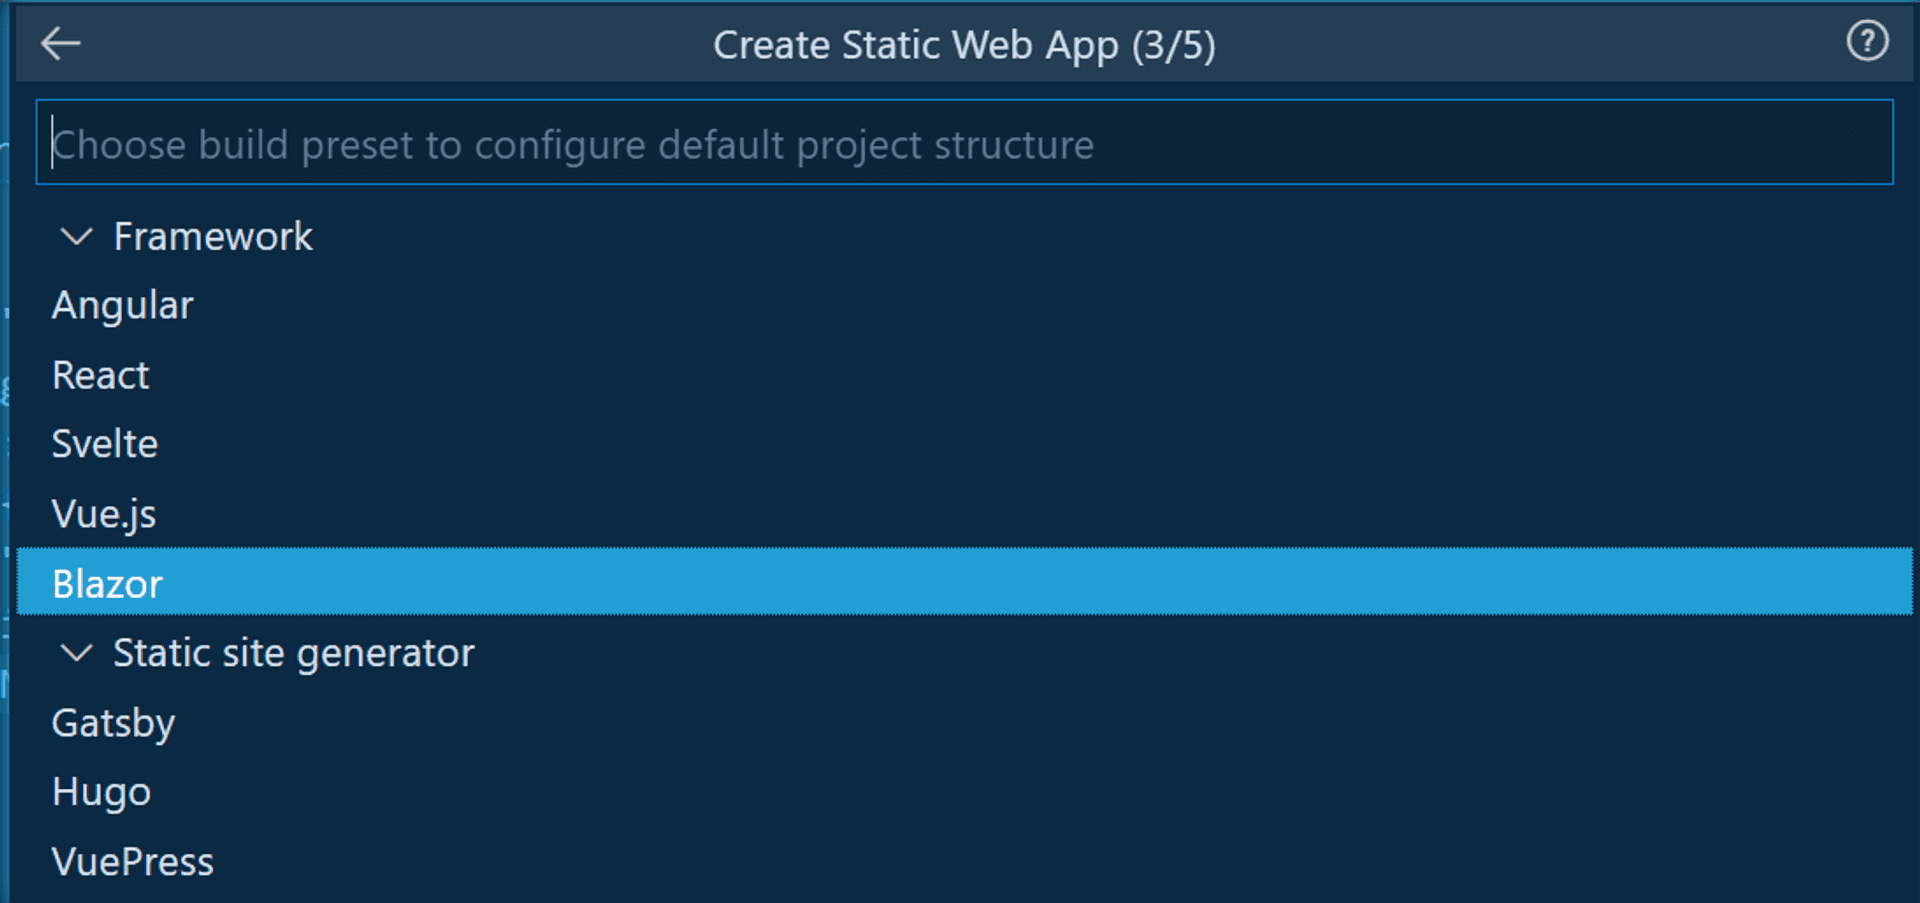 Azure SWA extension dialogue box with a dropdown displaying different frontend frameworks